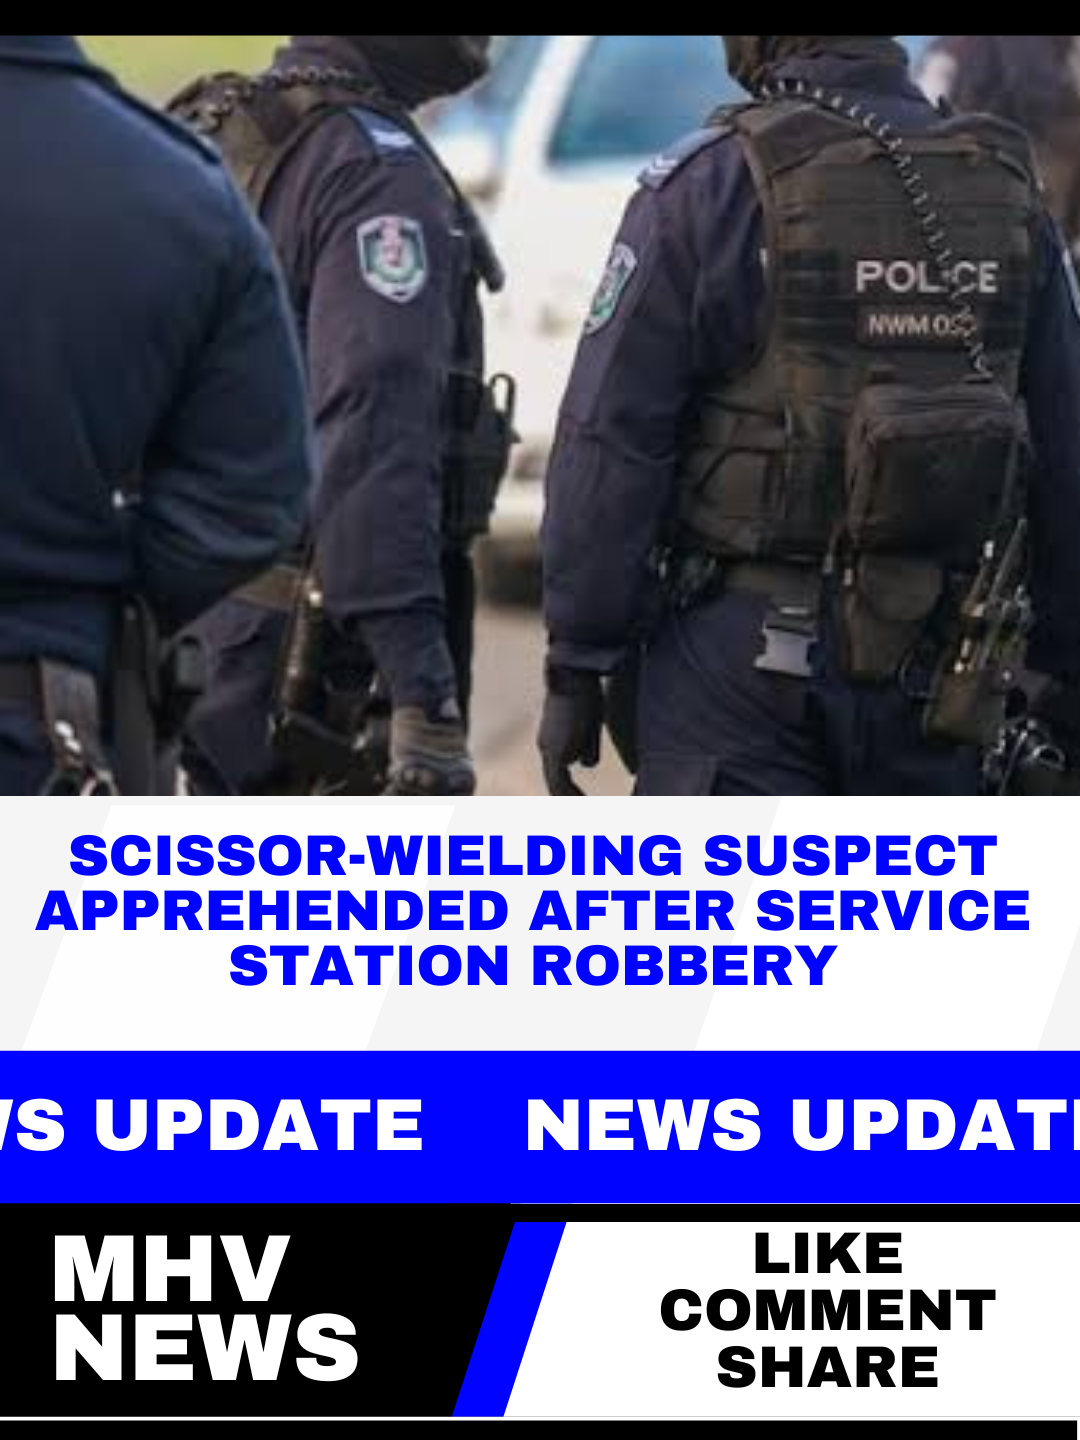 You are currently viewing Scissor-Wielding Suspect Apprehended After Service Station Robbery